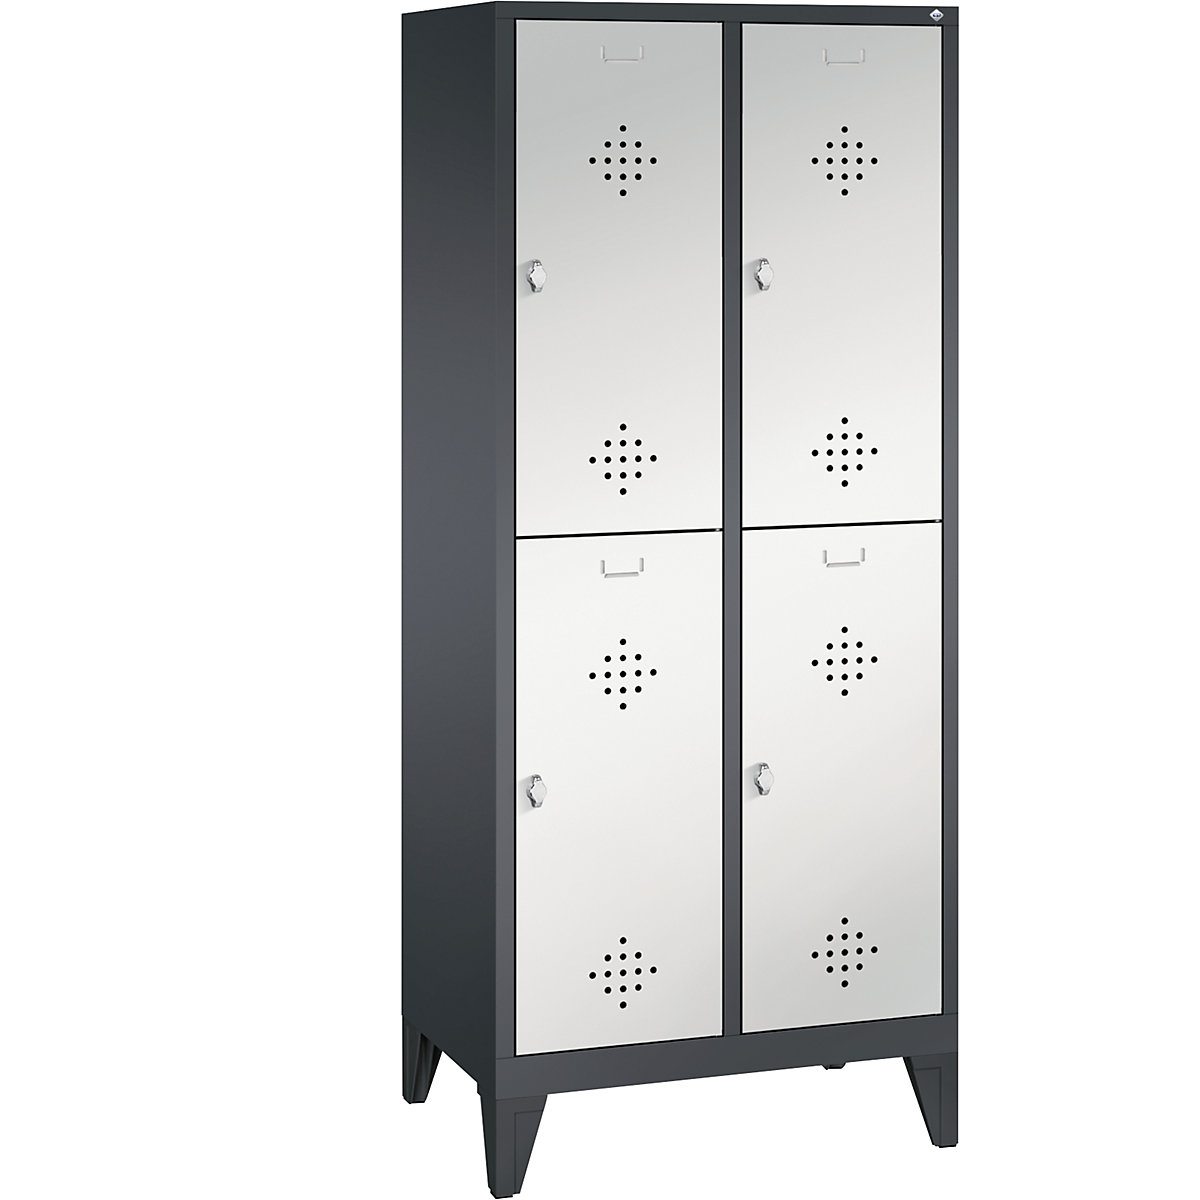 CLASSIC cloakroom locker with feet, double tier – C+P, 2 compartments, 2 shelf compartments each, compartment width 400 mm, black grey / light grey-8